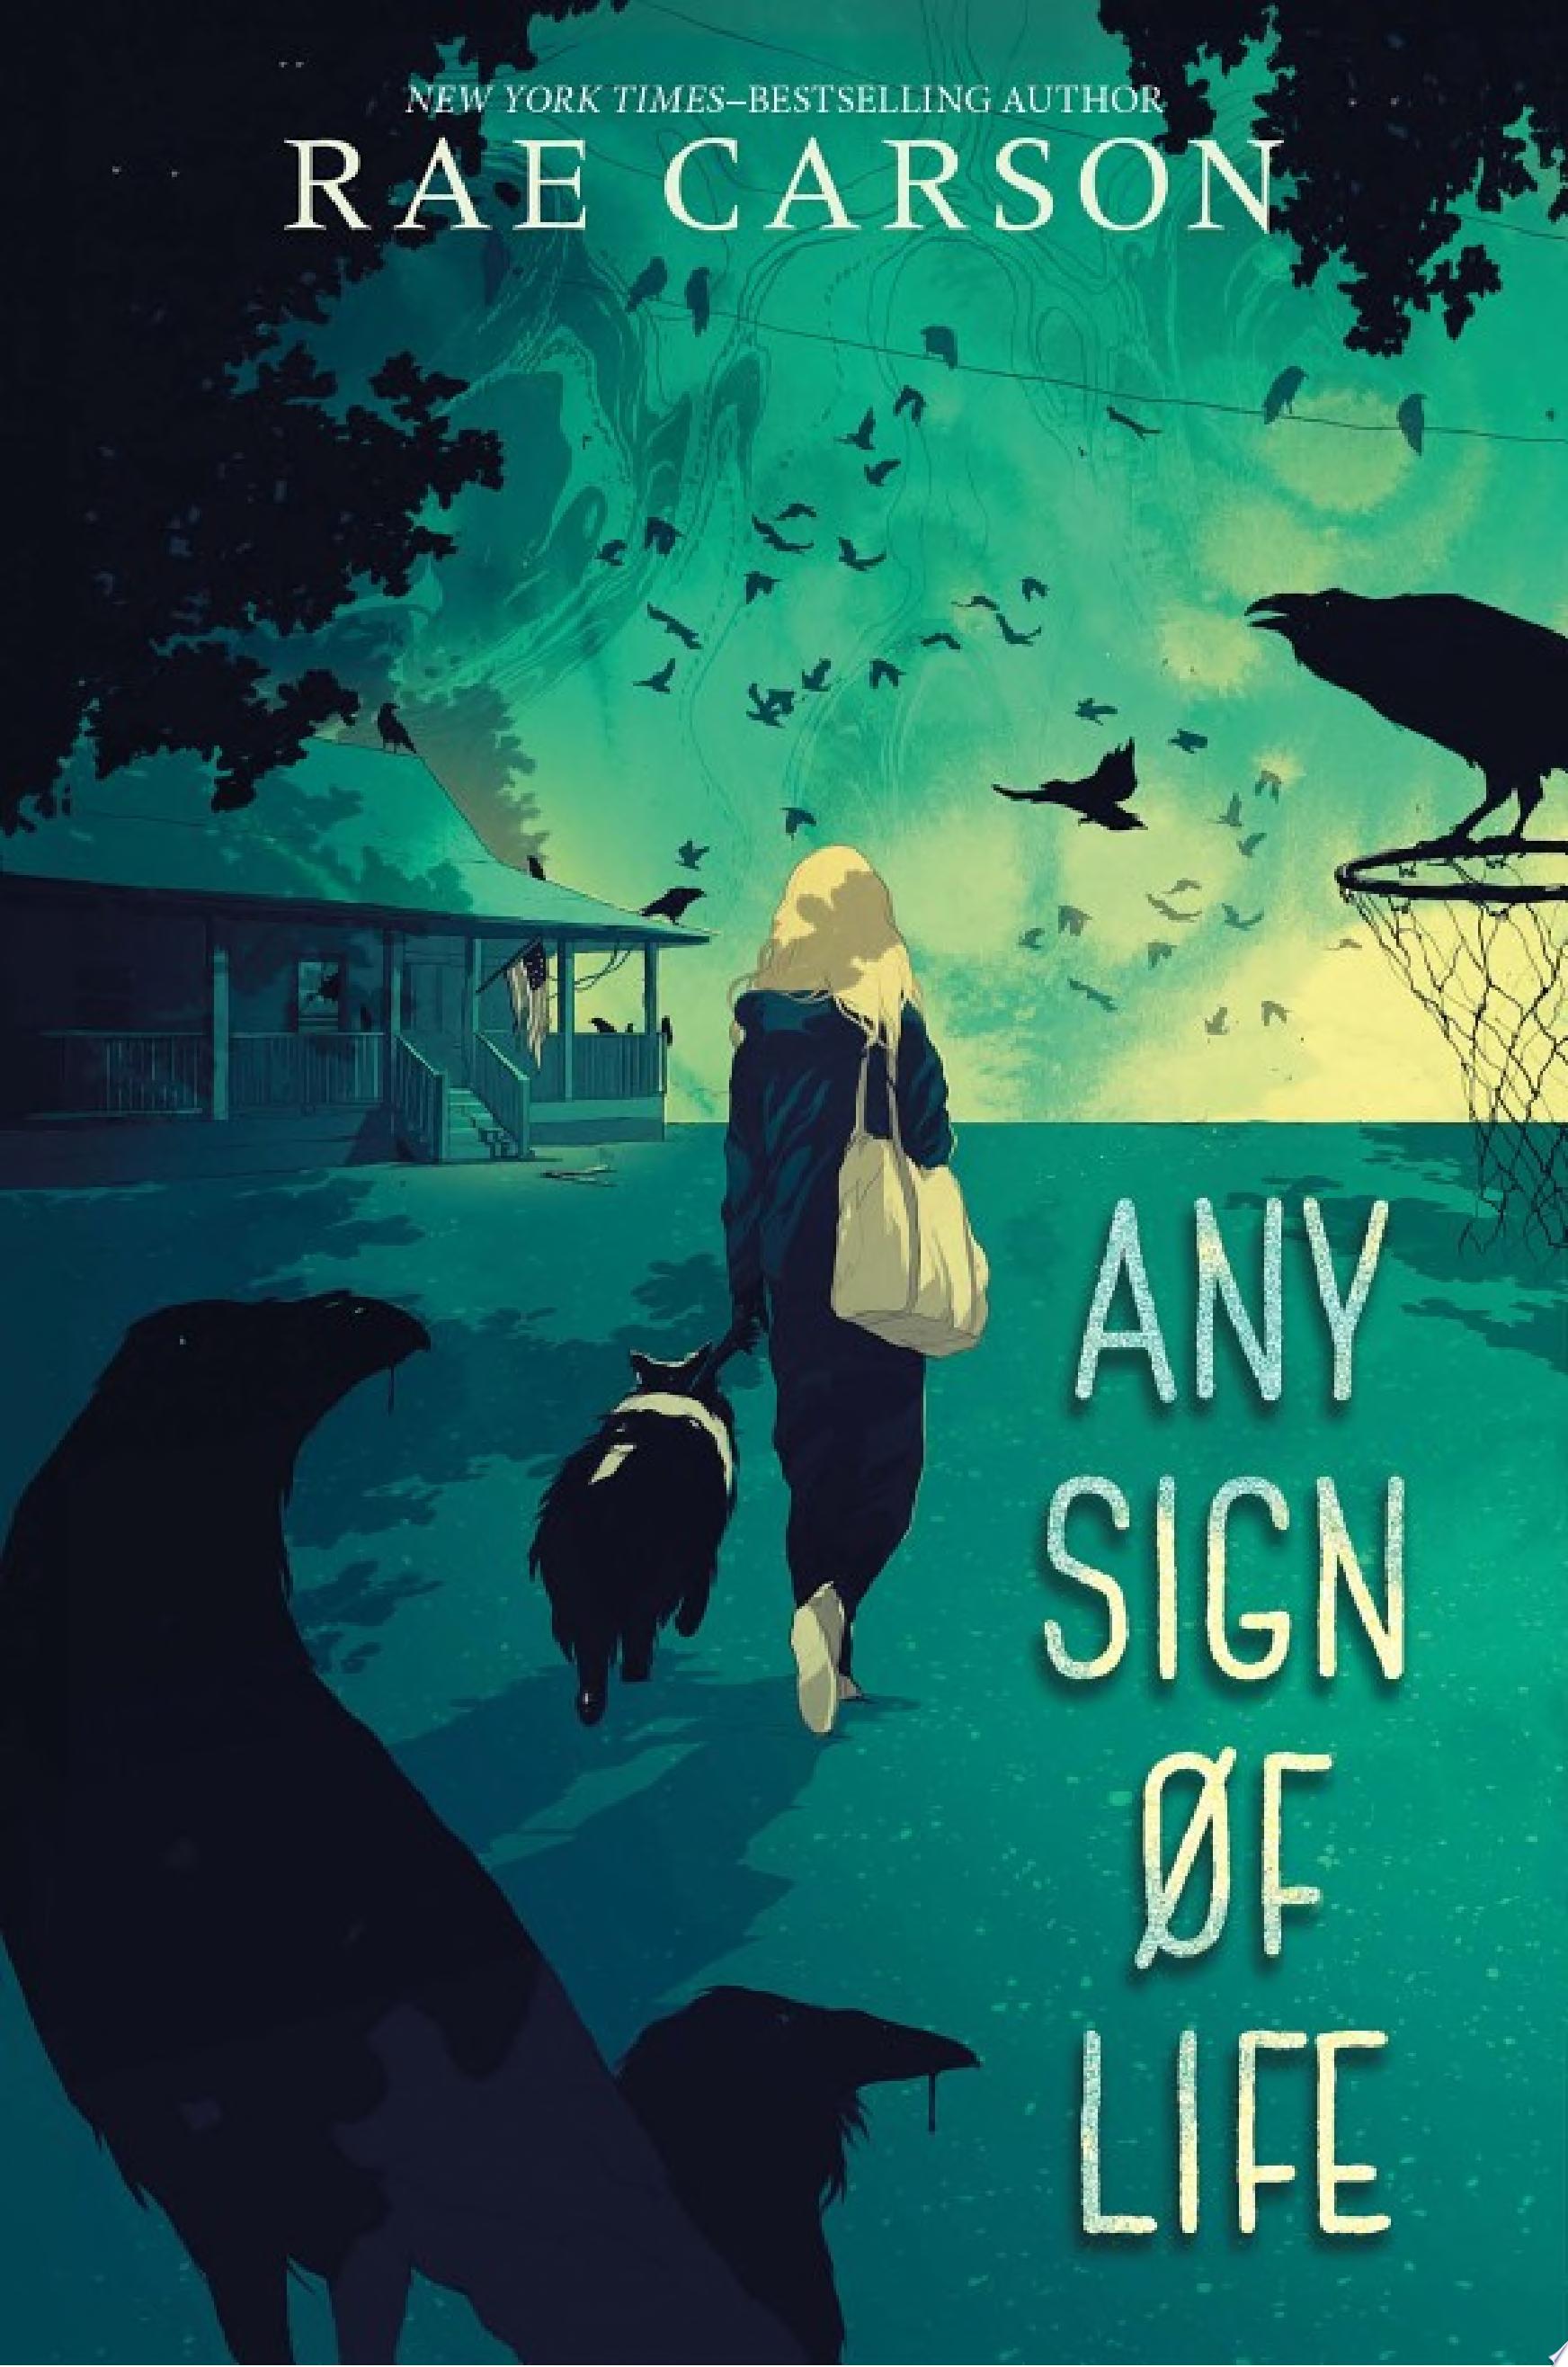 Image for "Any Sign of Life"